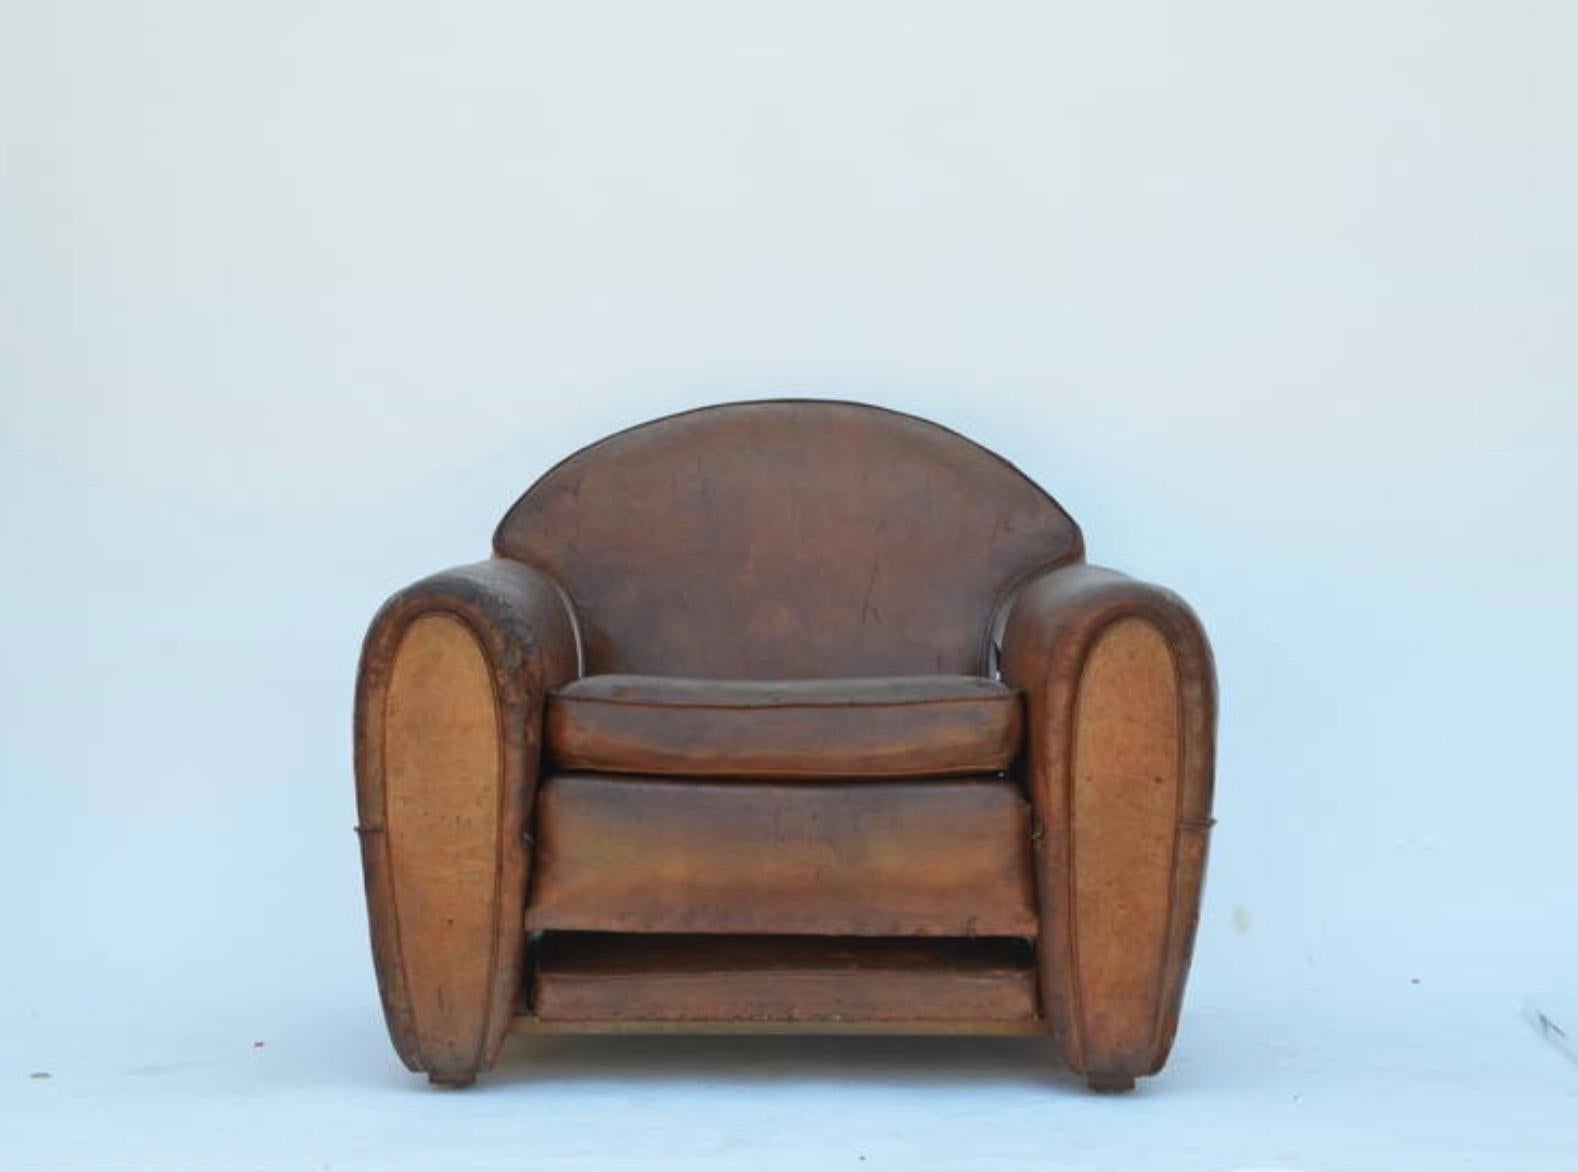 Exceptional Aged Leather French Art Deco Adjustable Club Chair In Distressed Condition For Sale In Los Angeles, CA